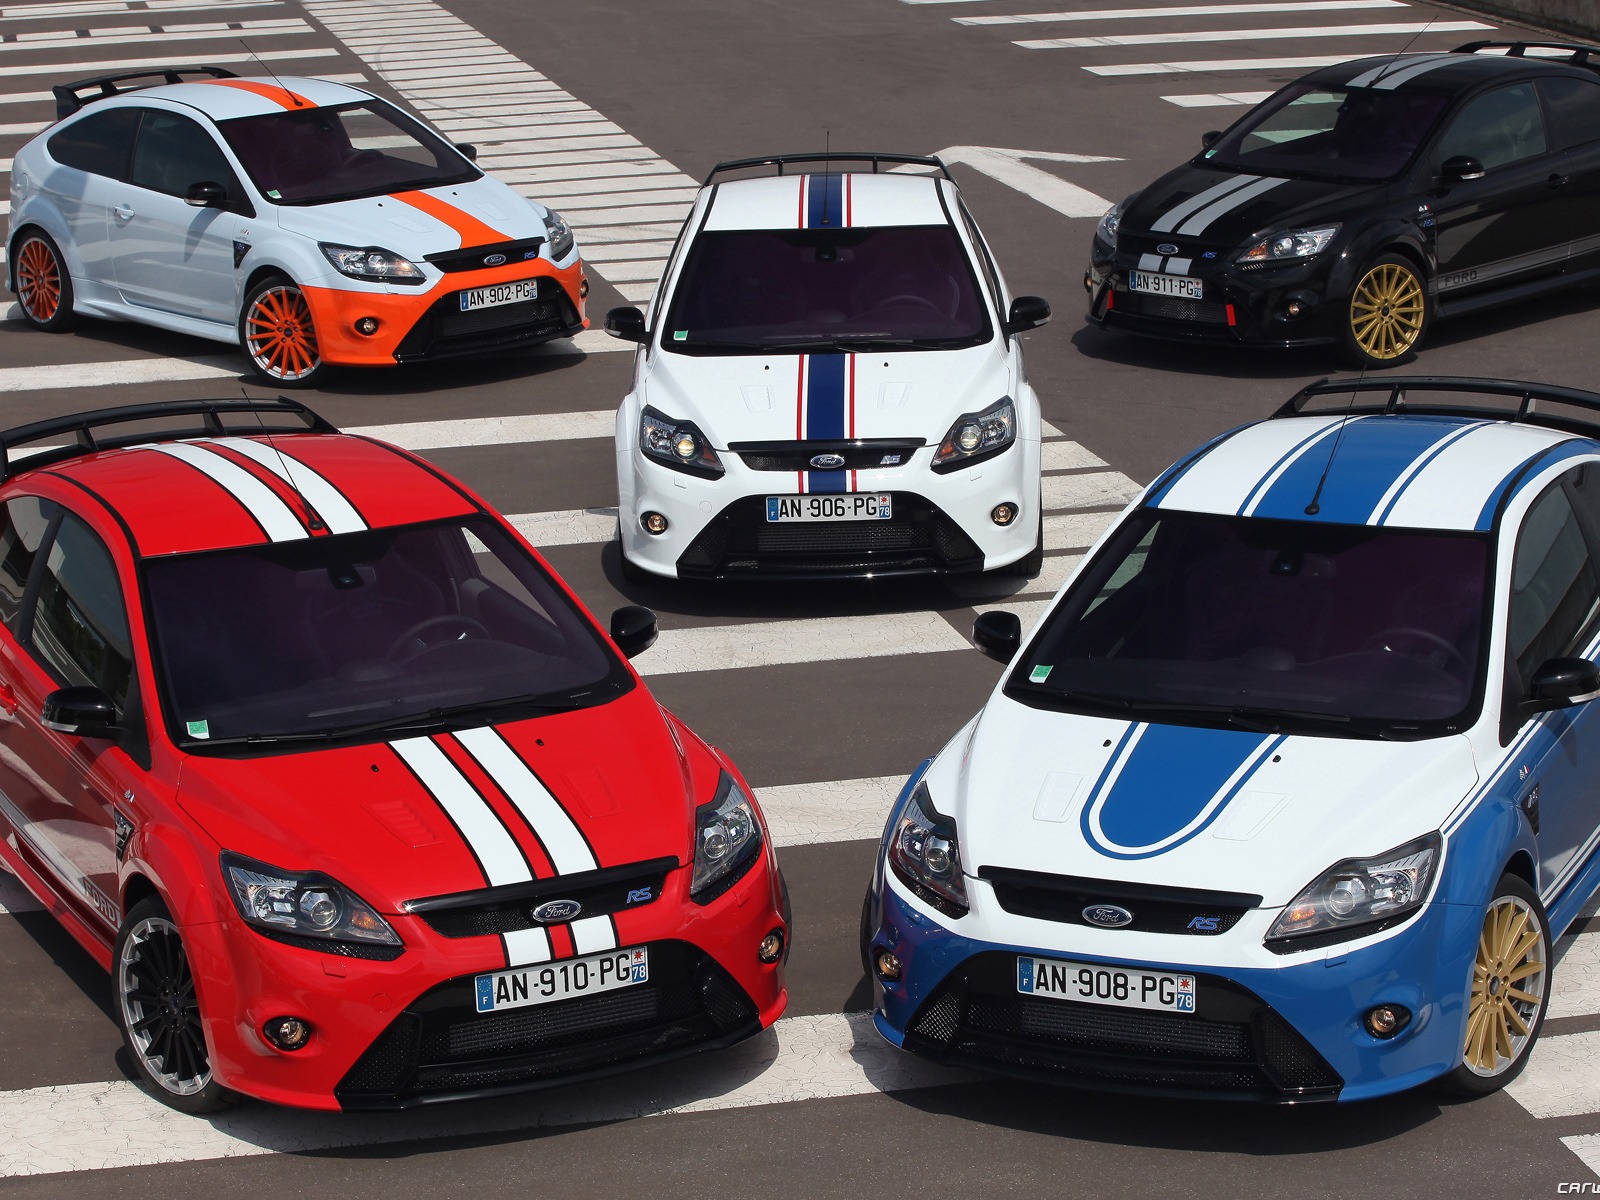 Ford Focus RS Le Mans Classic - 2010 福特11 - 1600x1200